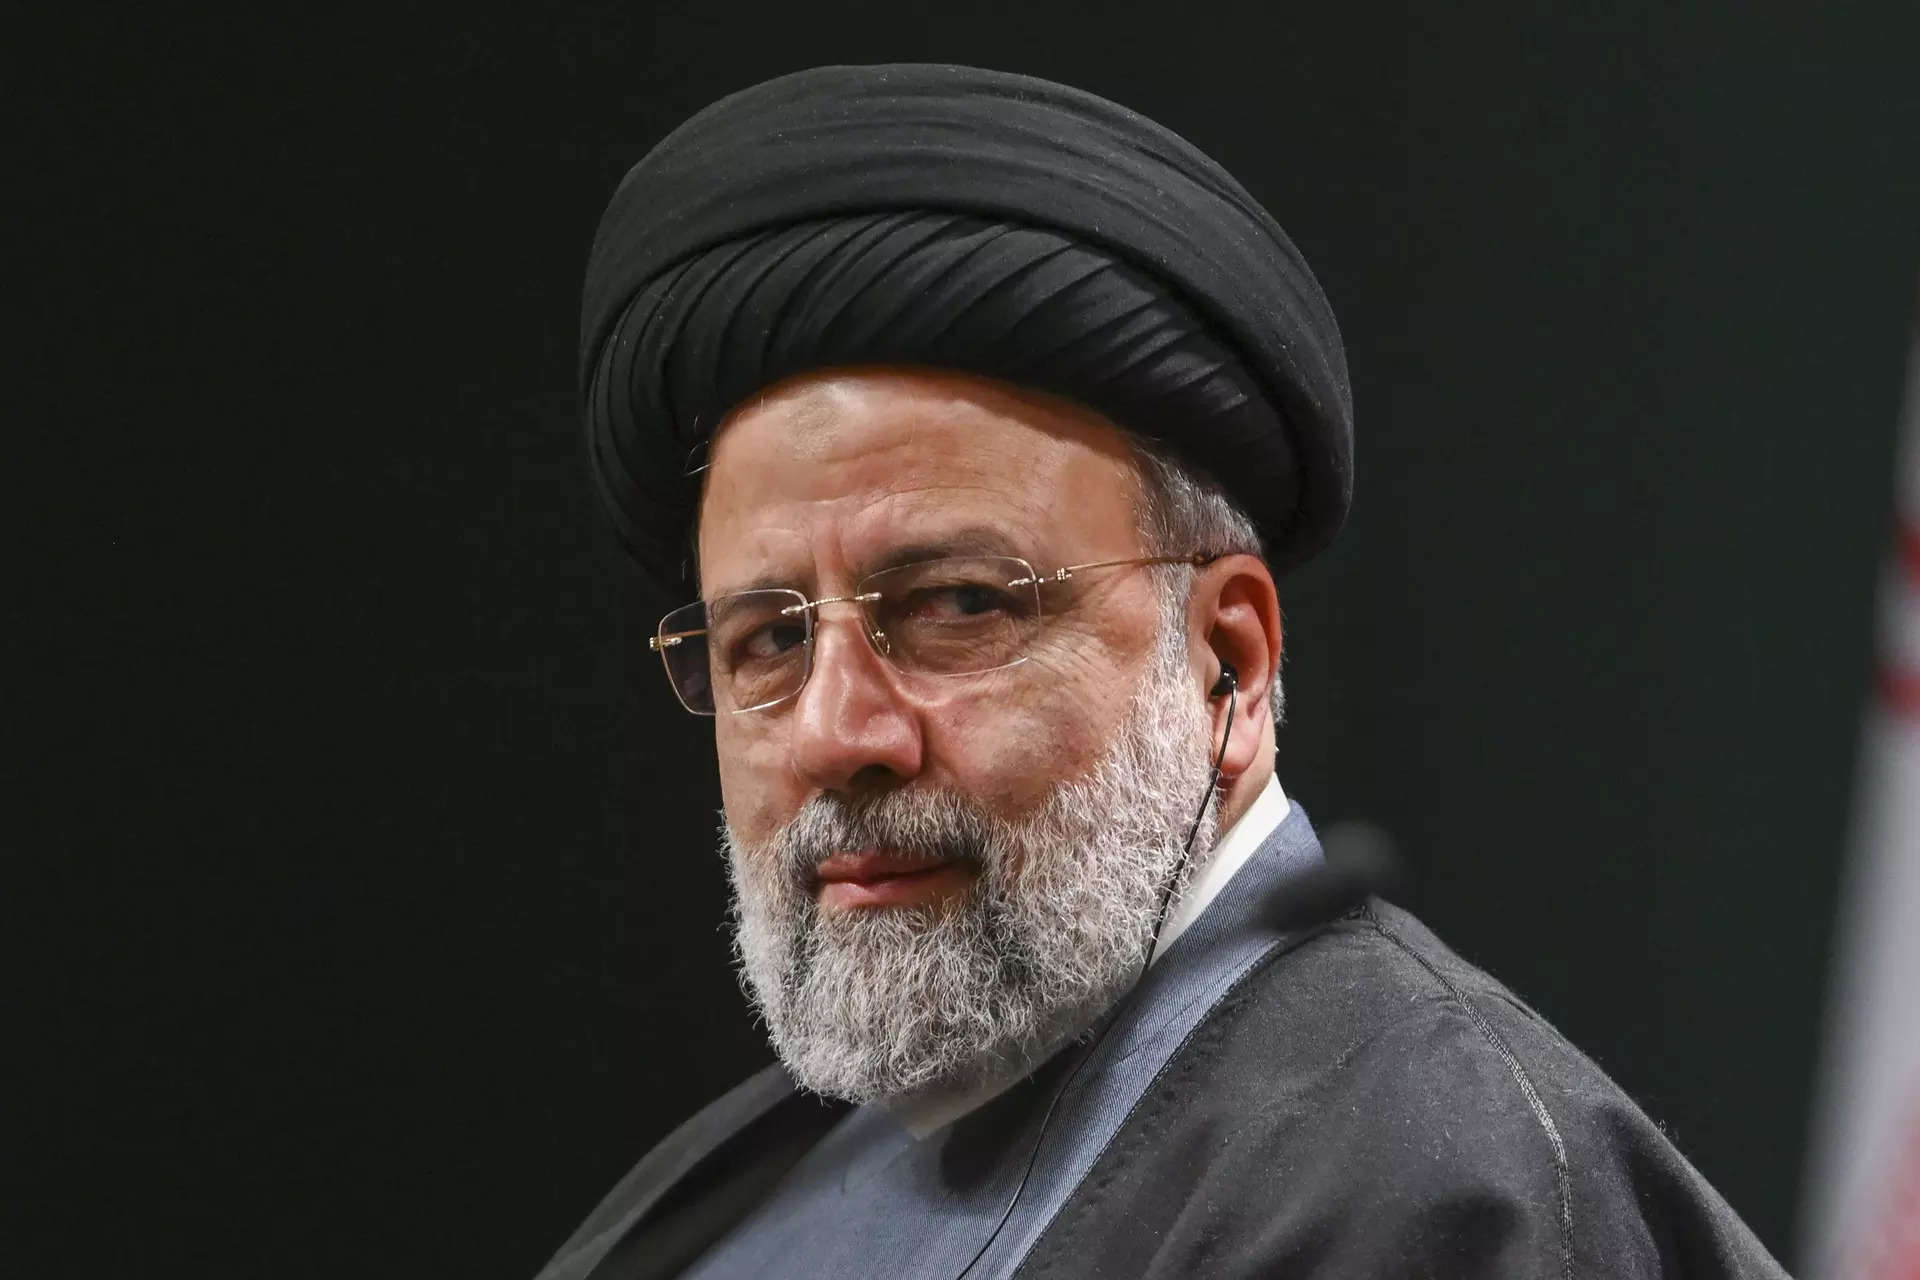 Speculation arises over potential Israeli involvement in Iranian President Raisi's helicopter crash 